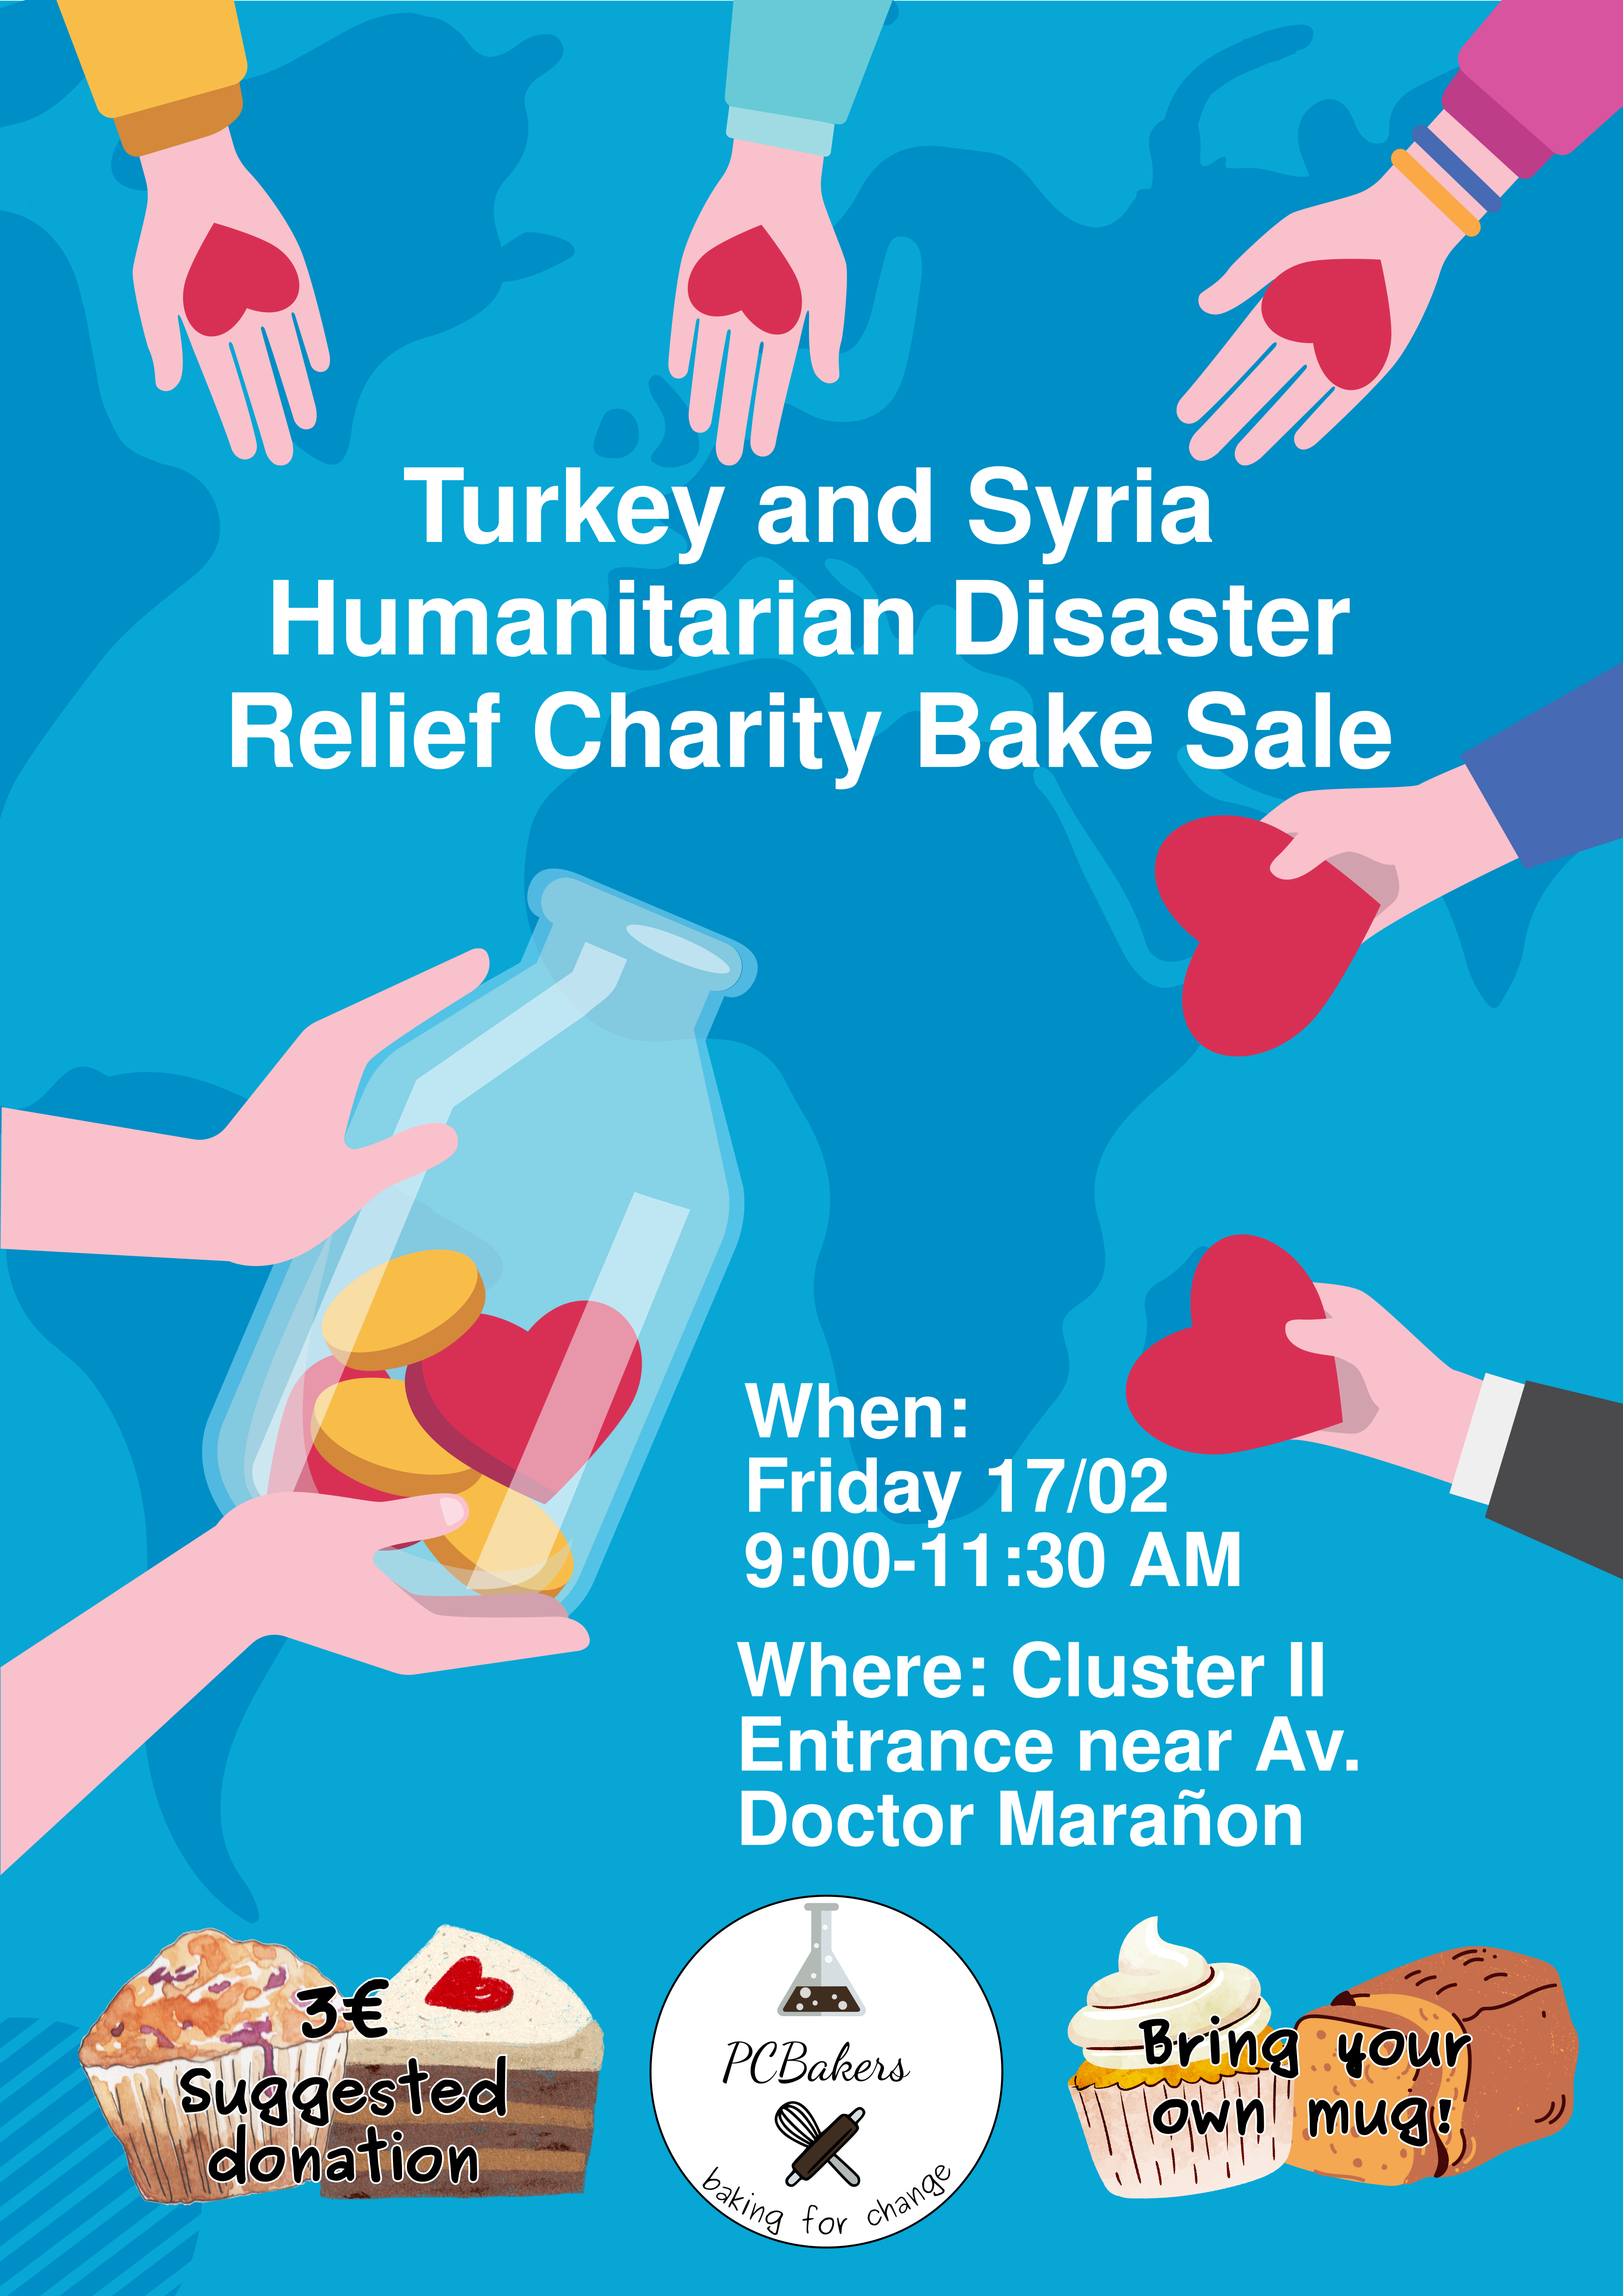 Bake Sale February 17th - Turkey and Syria Humanitarian Disaster Relief